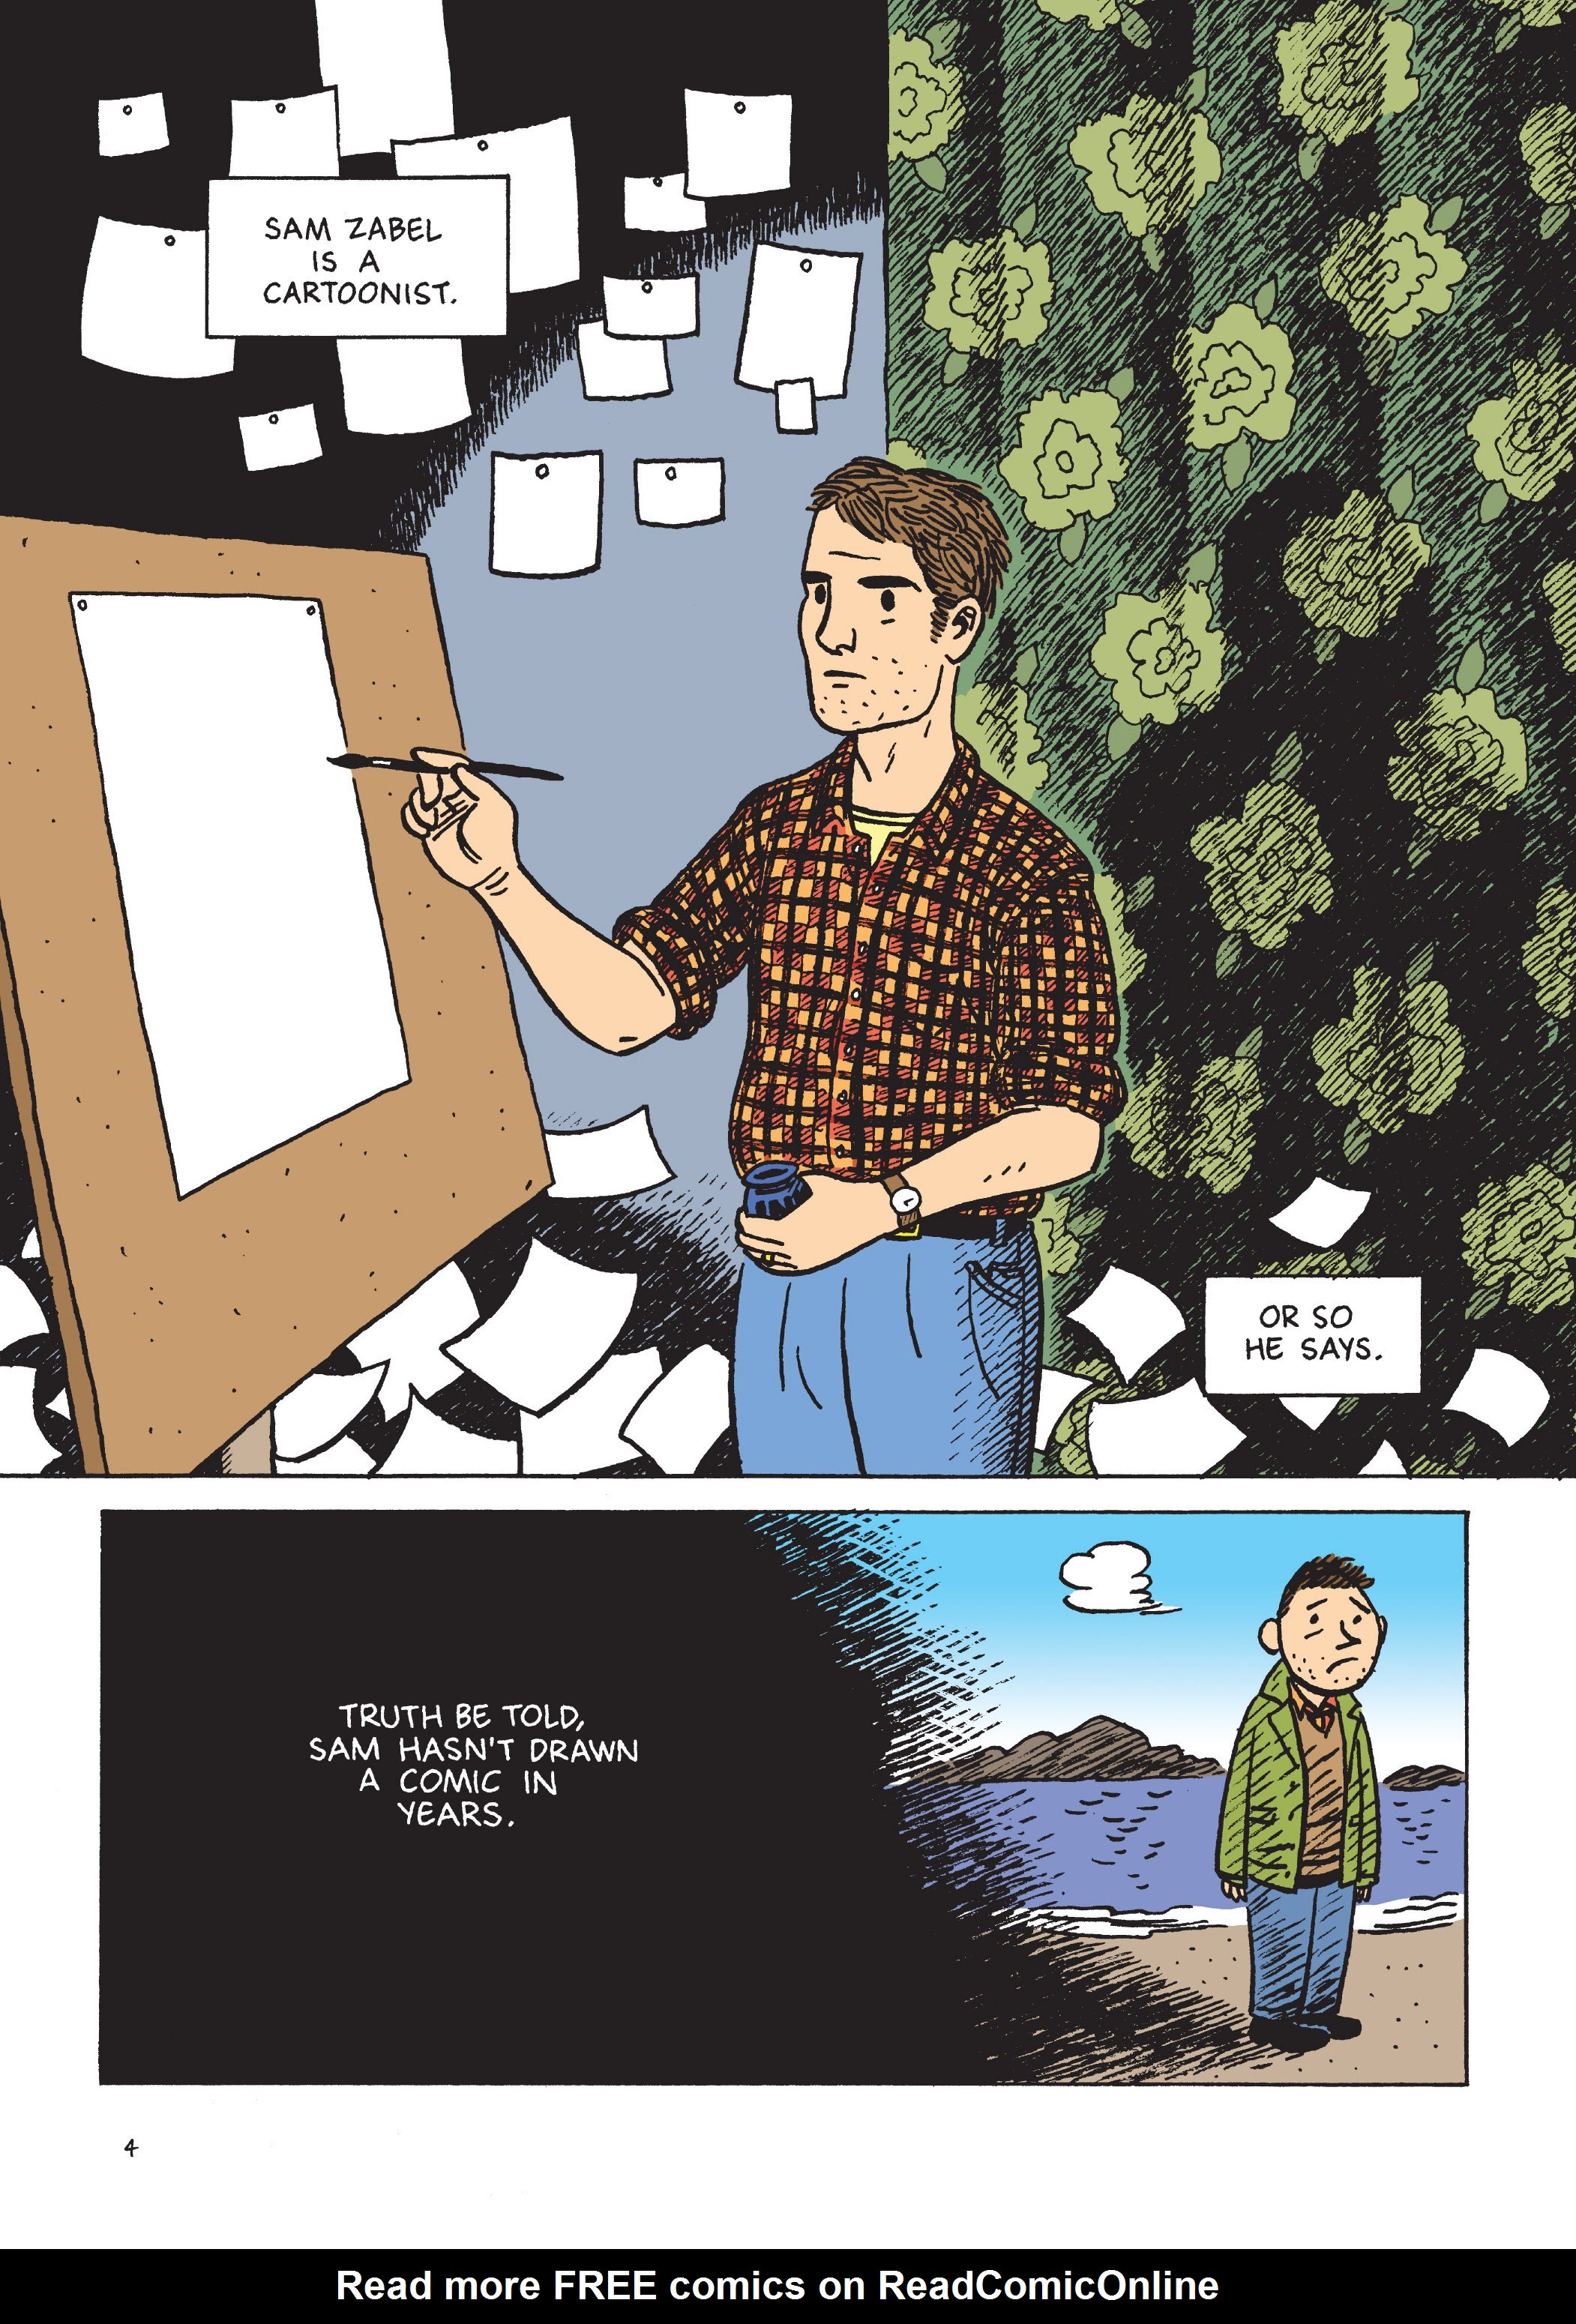 Read online Sam Zabel and the Magic Pen comic -  Issue # TPB (Part 1) - 9